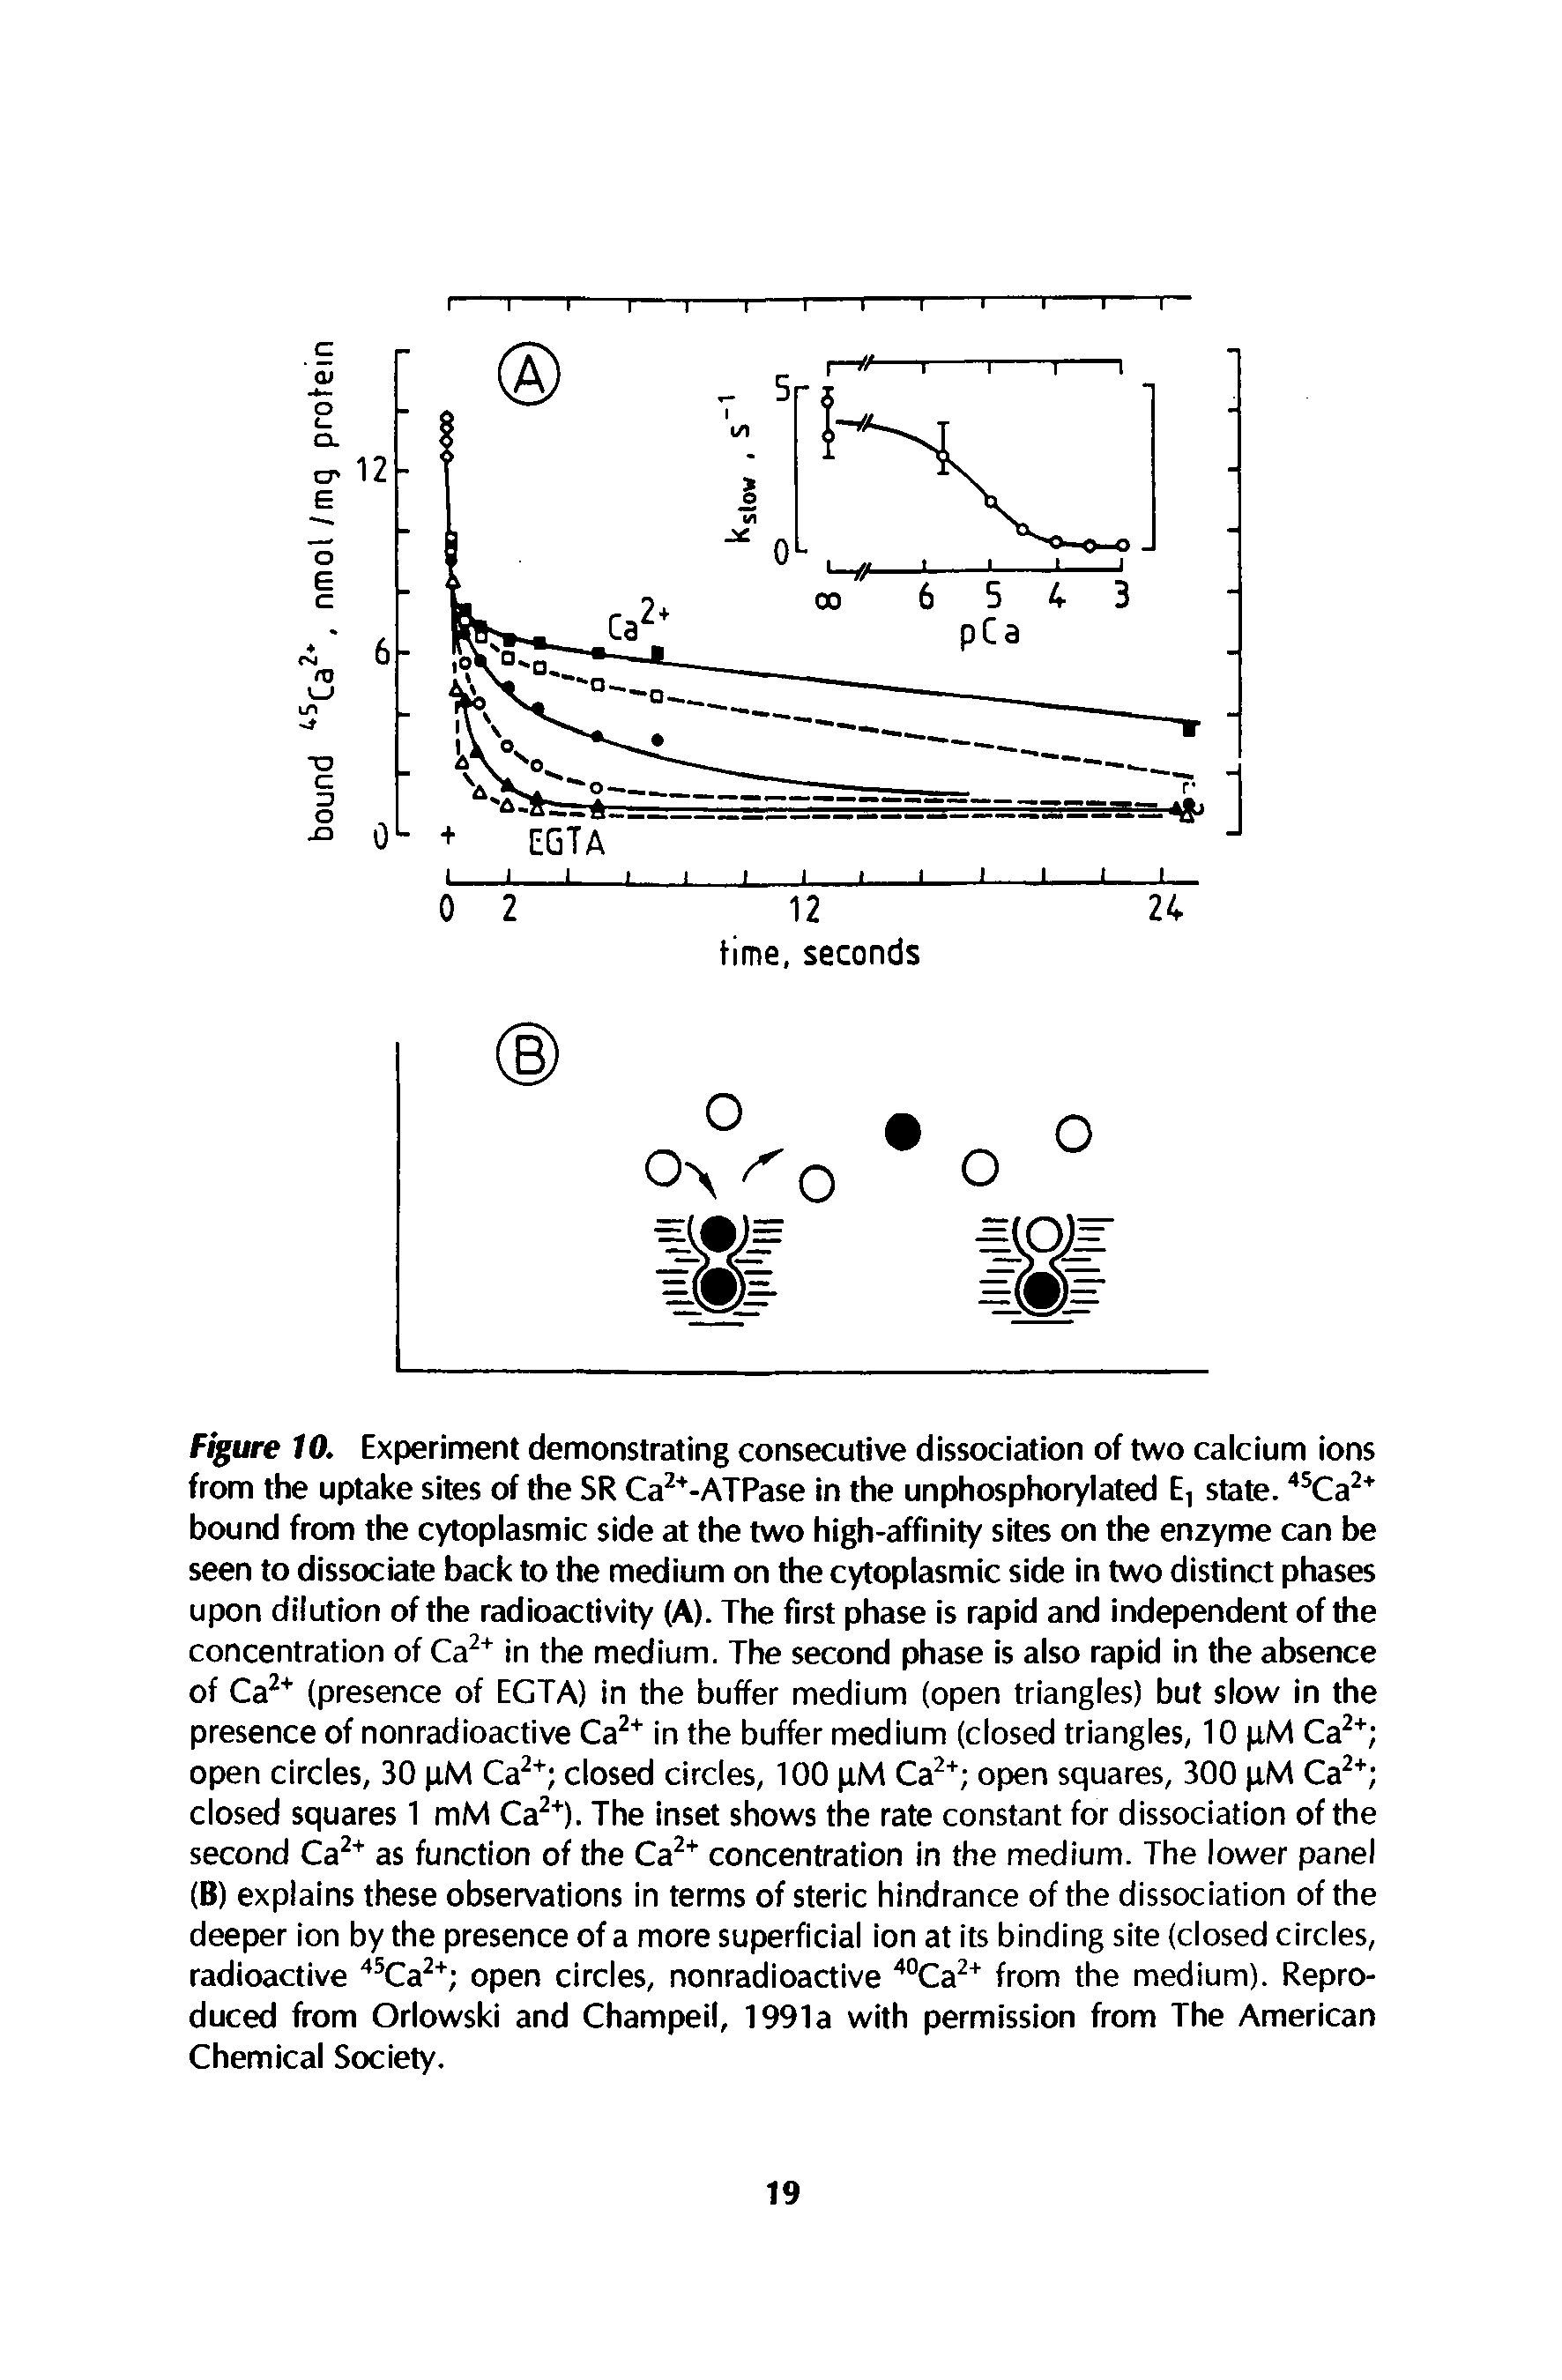 Figure 10. Experiment demonstrating consecutive dissociation of two calcium ions from the uptake sites of the SR Ca2+-ATPase in the unphosphorylated E, state. 45Ca2+ bound from the cytoplasmic side at the two high-affinity sites on the enzyme can be seen to dissociate back to the medium on the cytoplasmic side in two distinct phases upon dilution of the radioactivity (A). The first phase is rapid and independent of the concentration of Ca2+ in the medium. The second phase is also rapid in the absence of Ca2+ (presence of EGTA) in the buffer medium (open triangles) but slow in the presence of nonradioactive Ca2+ in the buffer medium (closed triangles, 10 pM Ca2+ open circles, 30 pM Ca2+ closed circles, 100 pM Ca2+ open squares, 300 pM Ca2+ closed squares 1 mM Ca2+). The inset shows the rate constant for dissociation of the second Ca2+ as function of the Ca2+ concentration in the medium. The lower panel (B) explains these observations in terms of steric hindrance of the dissociation of the deeper ion by the presence of a more superficial ion at its binding site (closed circles, radioactive 45Ca2+ open circles, nonradioactive 40Ca2+ from the medium). Reproduced from Orlowski and Champeil, 1991a with permission from The American Chemical Society.